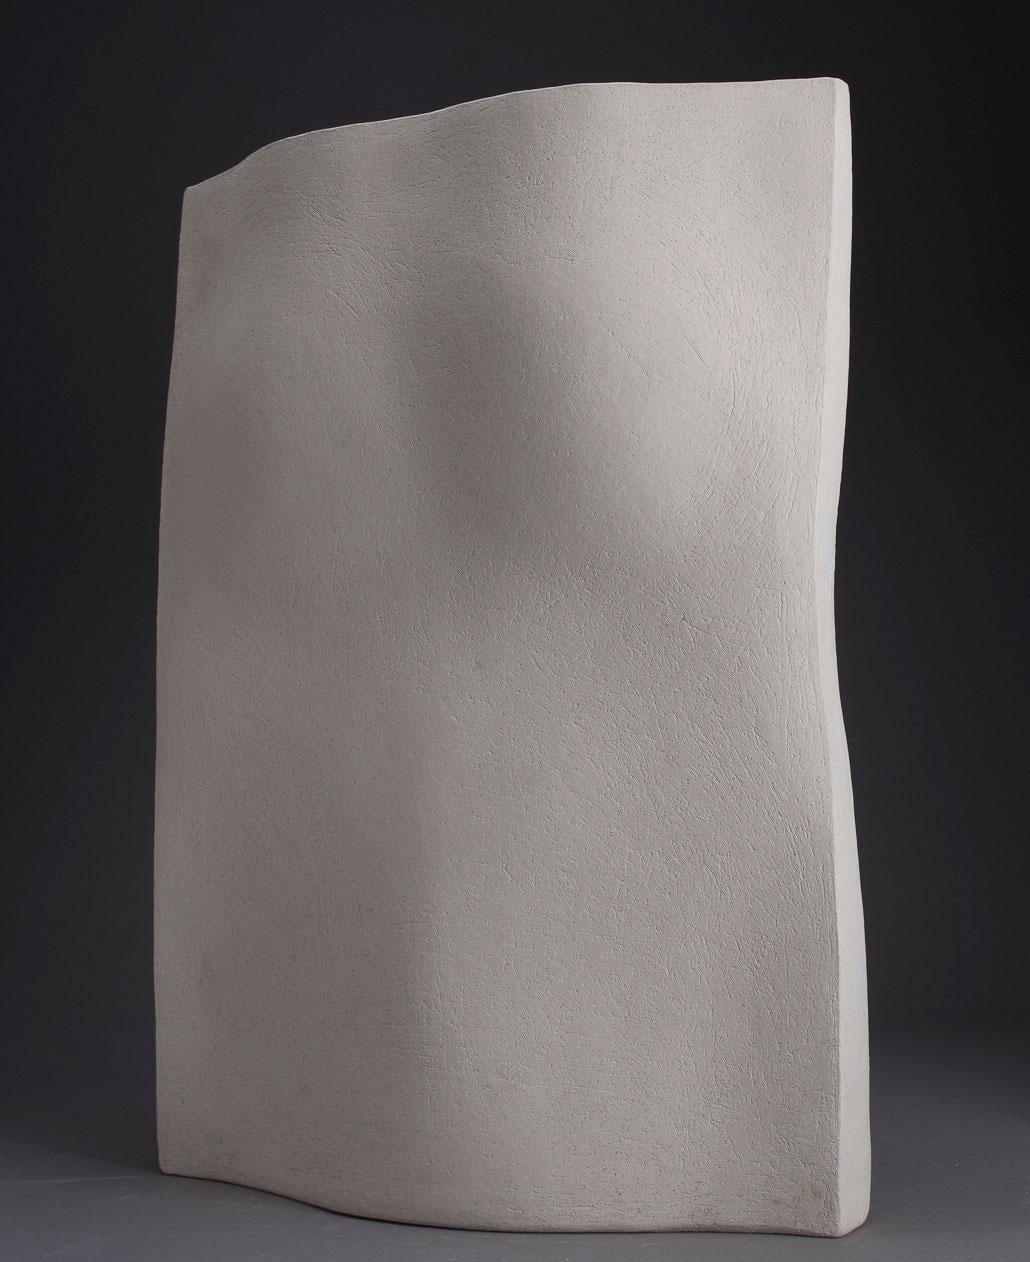 Steve Cartwright, Torso

Handmade Sculptural Ceramic, Stoneware Clay, fired to 1250c

56 cm height (22.05 in)

Maximum edition of 5 per year